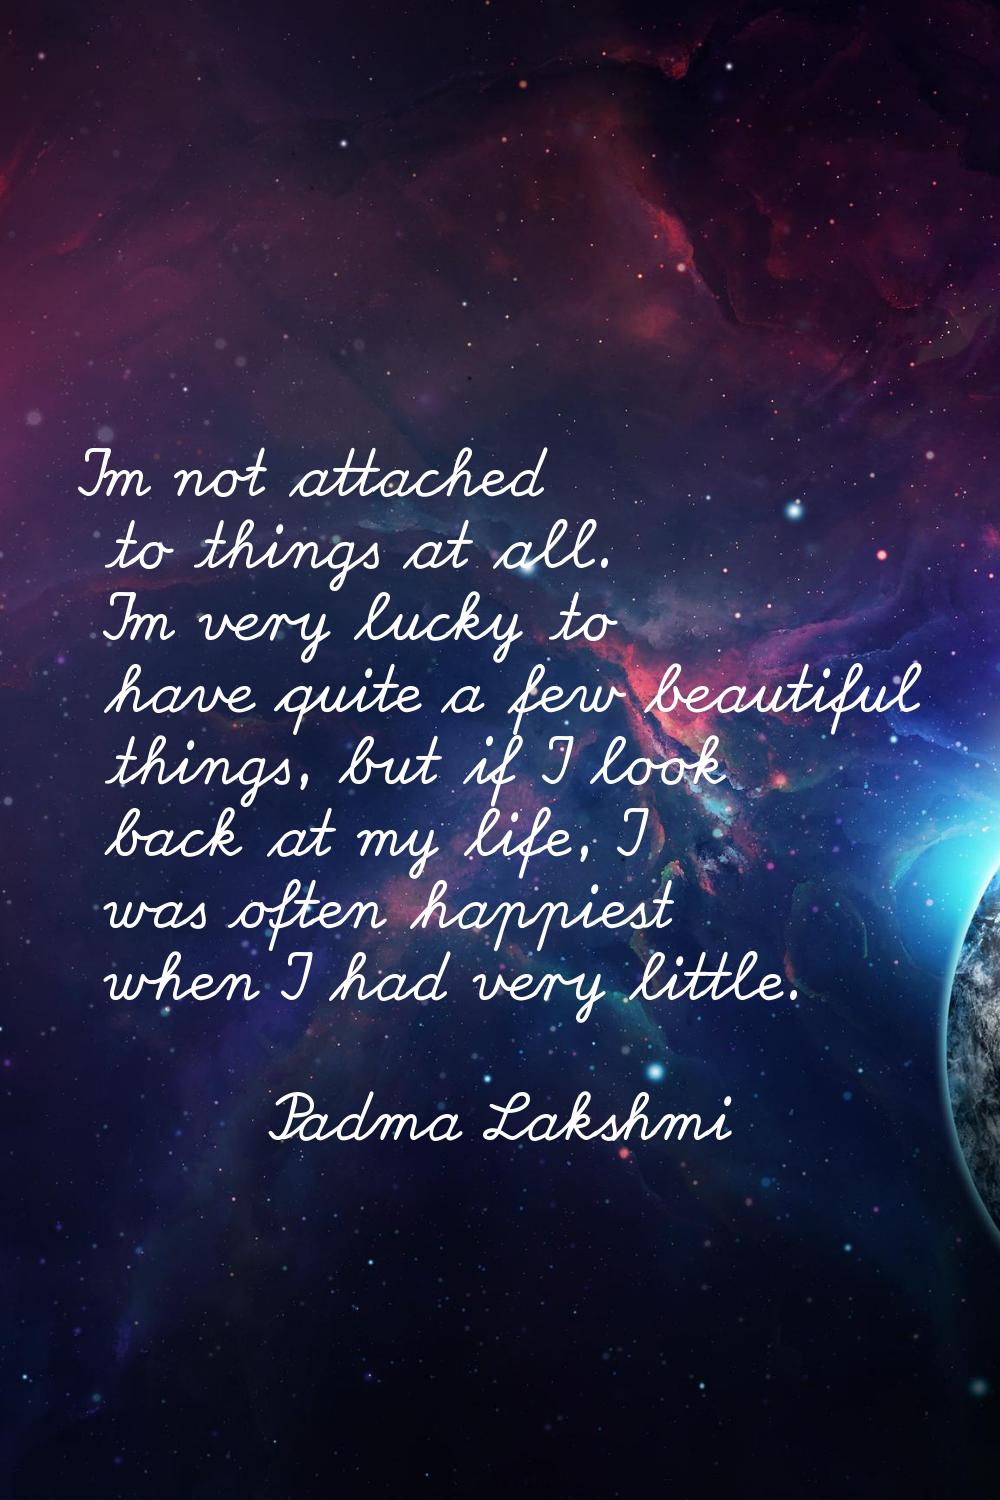 I'm not attached to things at all. I'm very lucky to have quite a few beautiful things, but if I lo